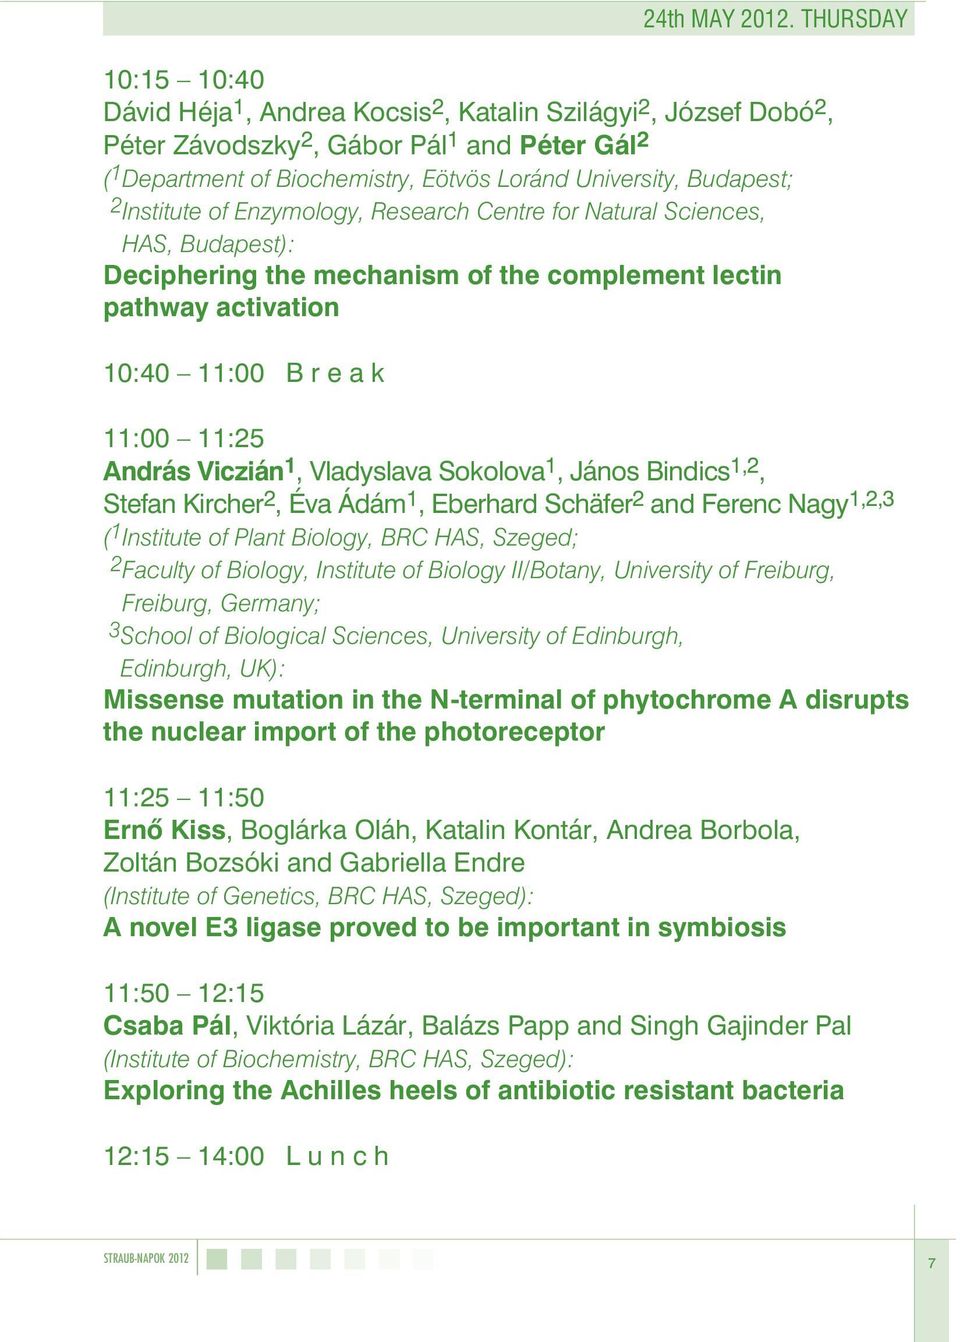 Budapest; 2 Institute of Enzymology, Research Centre for Natural Sciences, HAS, Budapest): Deciphering the mechanism of the complement lectin pathway activation 10:40 11:00 B r e a k 11:00 11:25